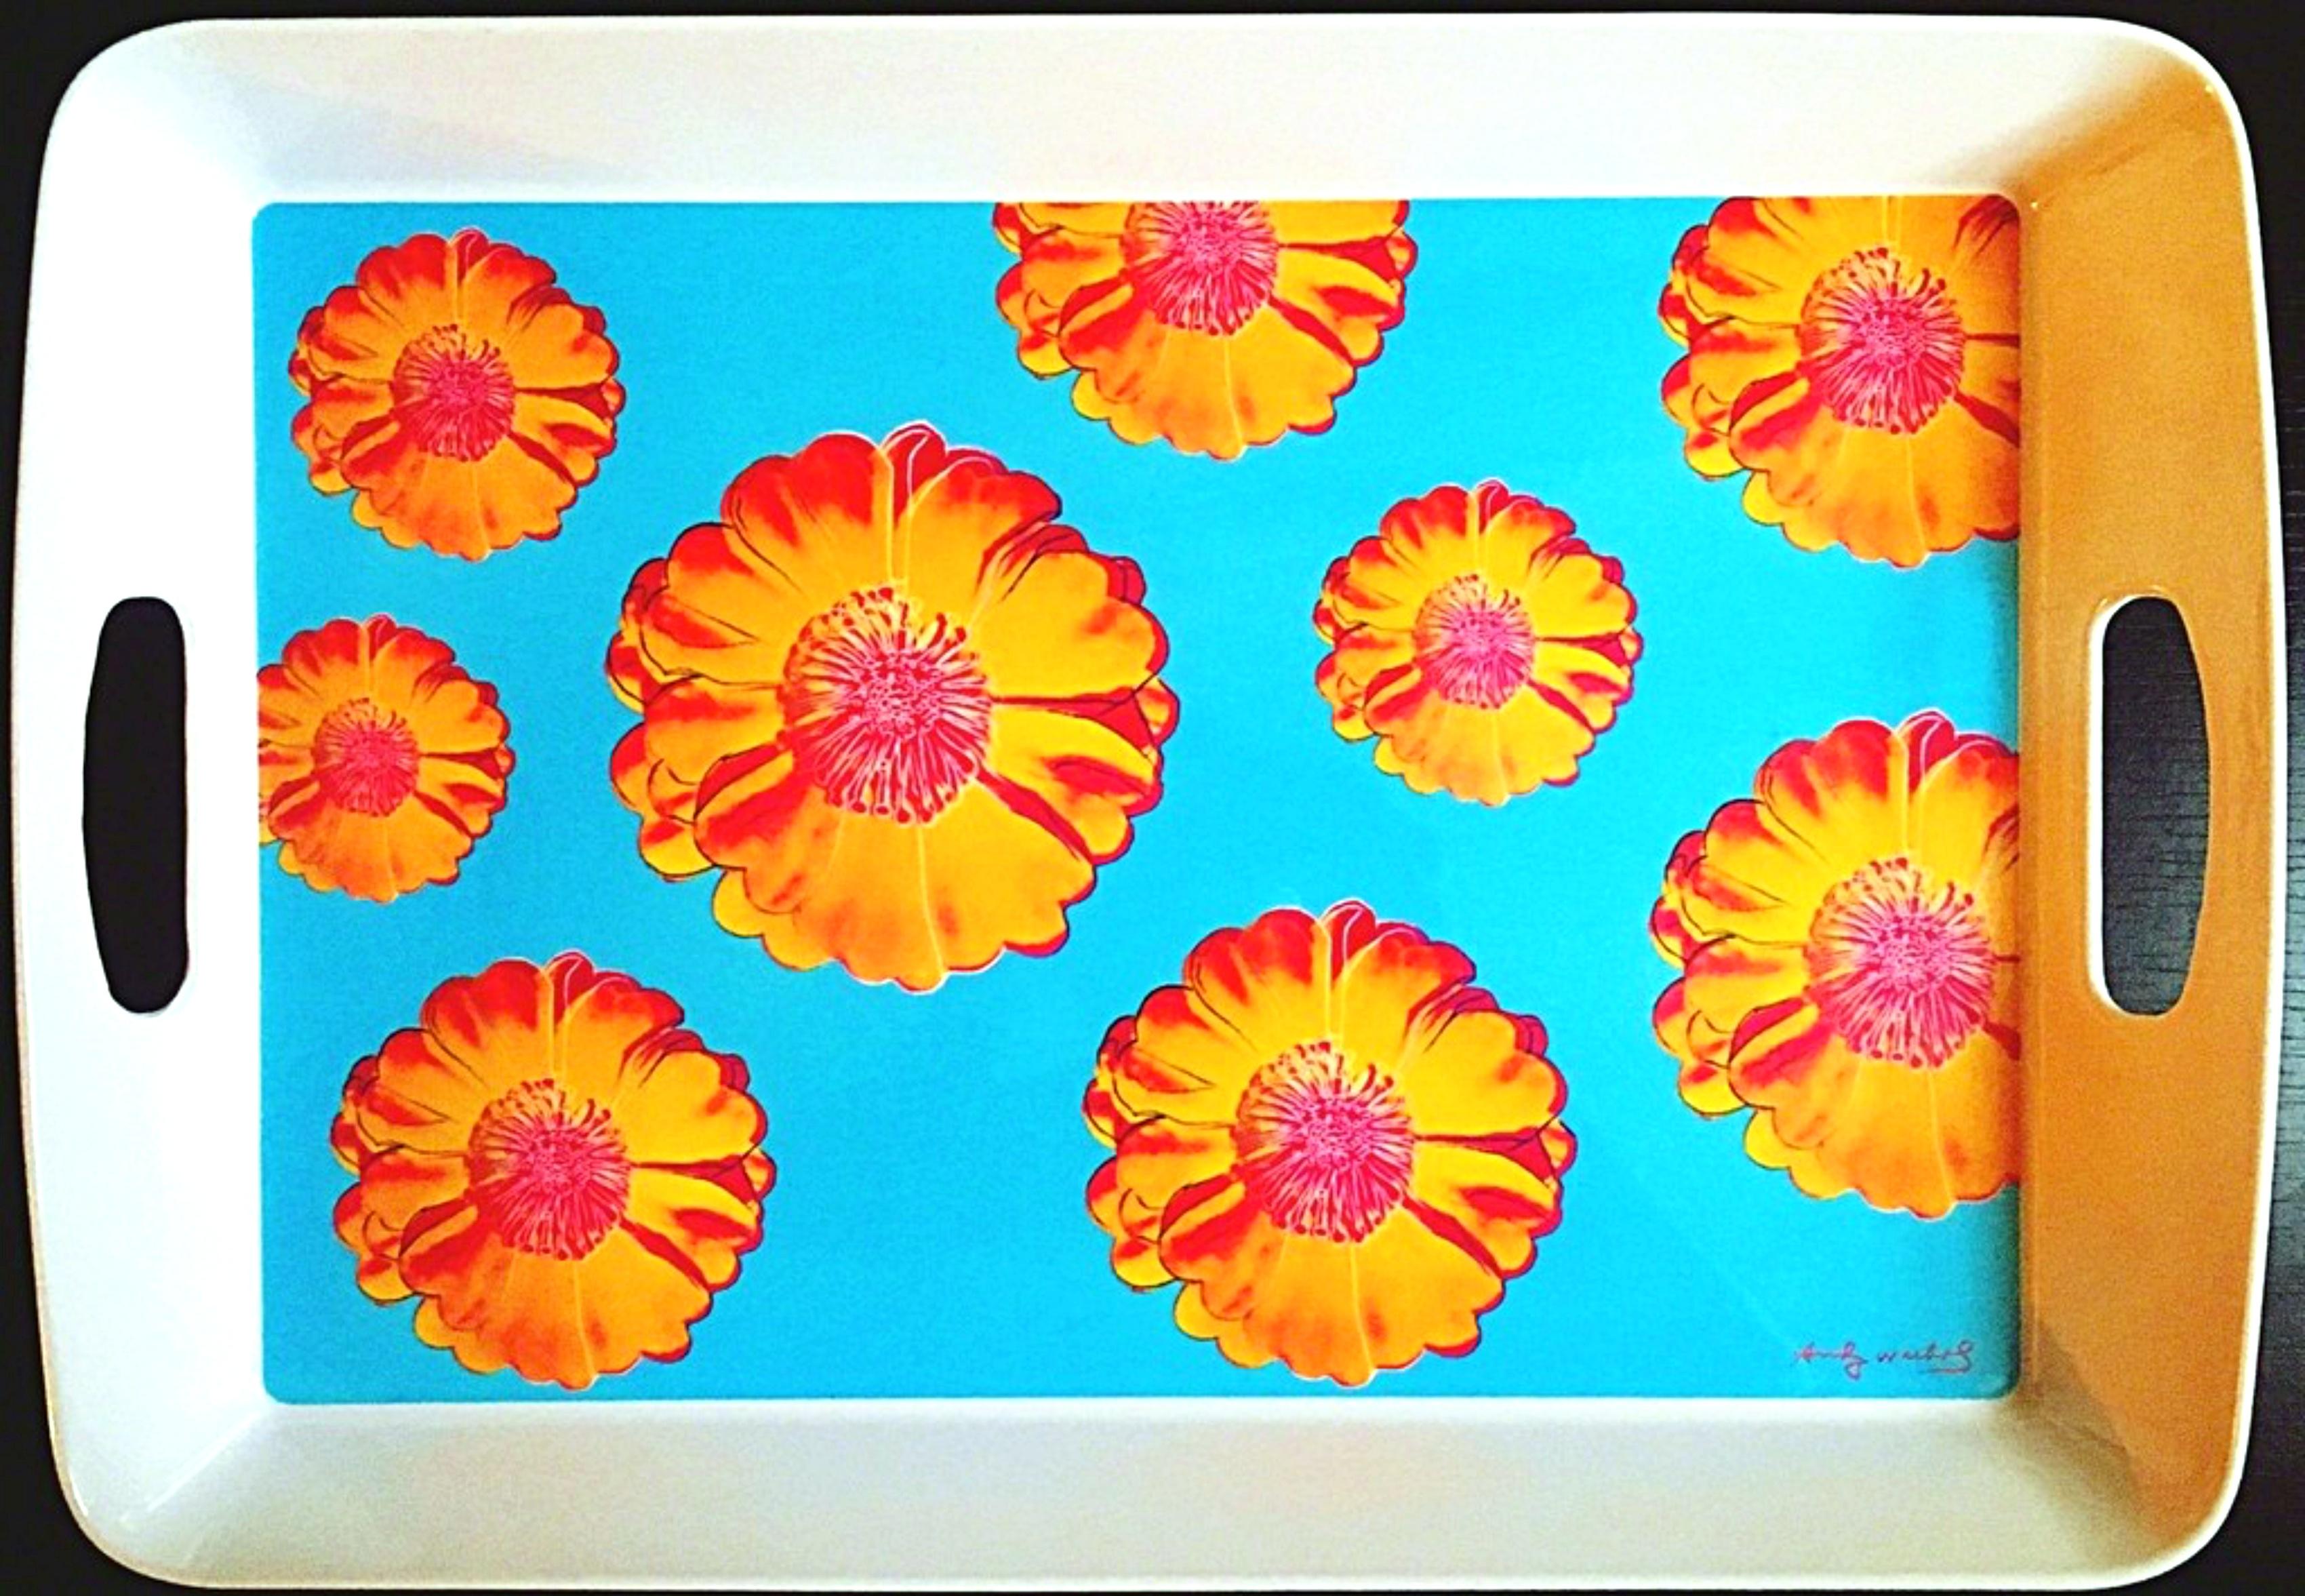 Tacoma Flower Tray (from the estate of Tim Hunt, Warhol Foundation curator) - Mixed Media Art by Andy Warhol